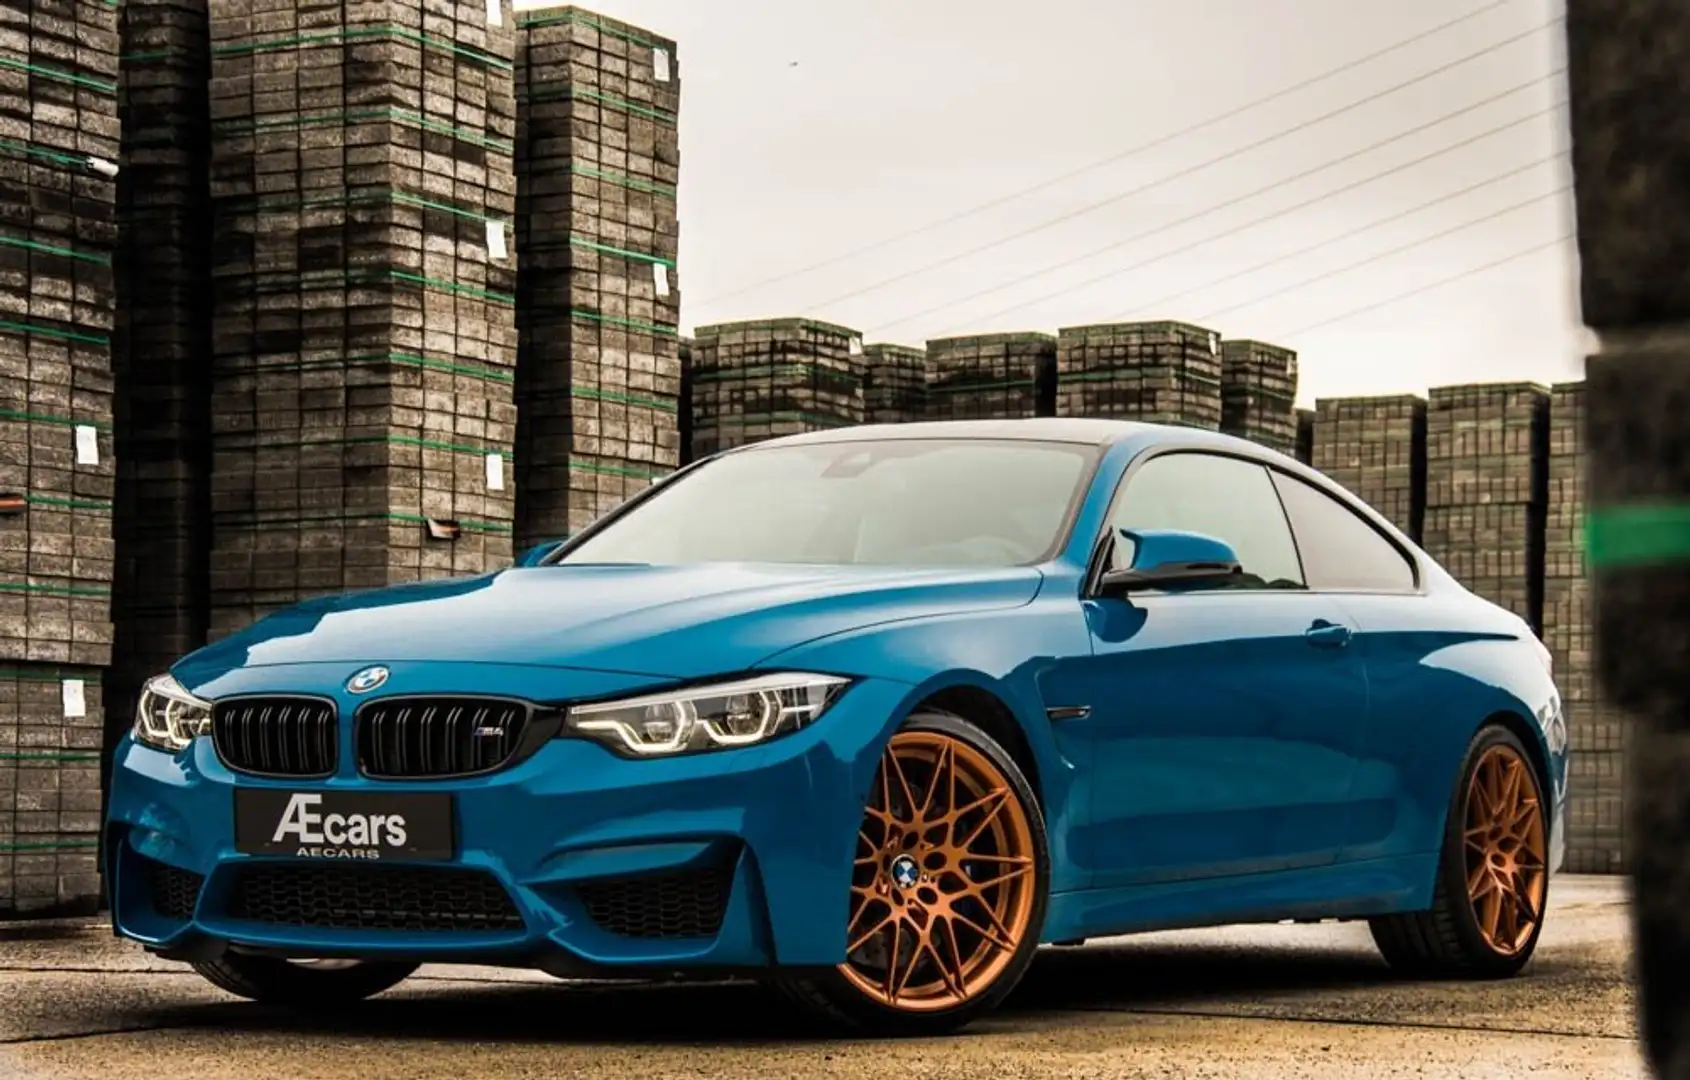 BMW M4 *** COMPETITION HERITAGE / LIMITED 1 OF 750 *** Albastru - 1